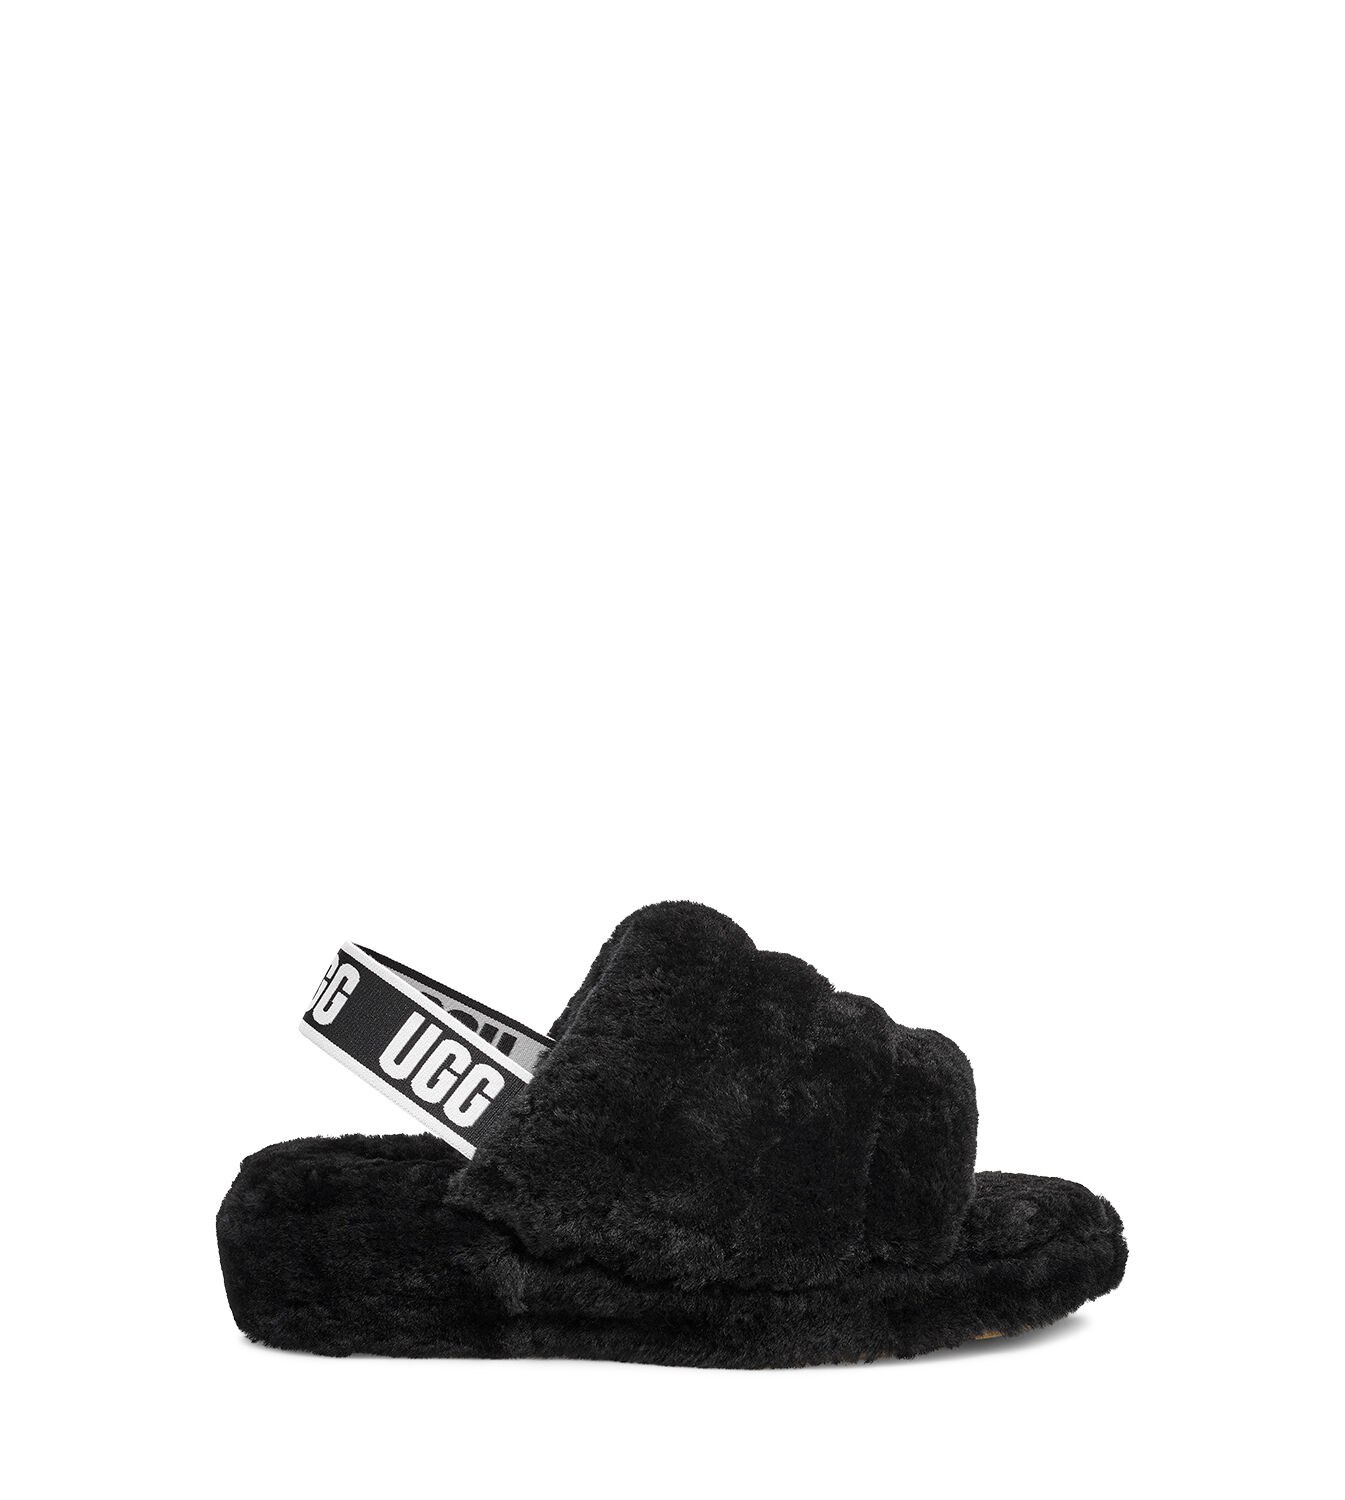 ugg slippers on sale canada